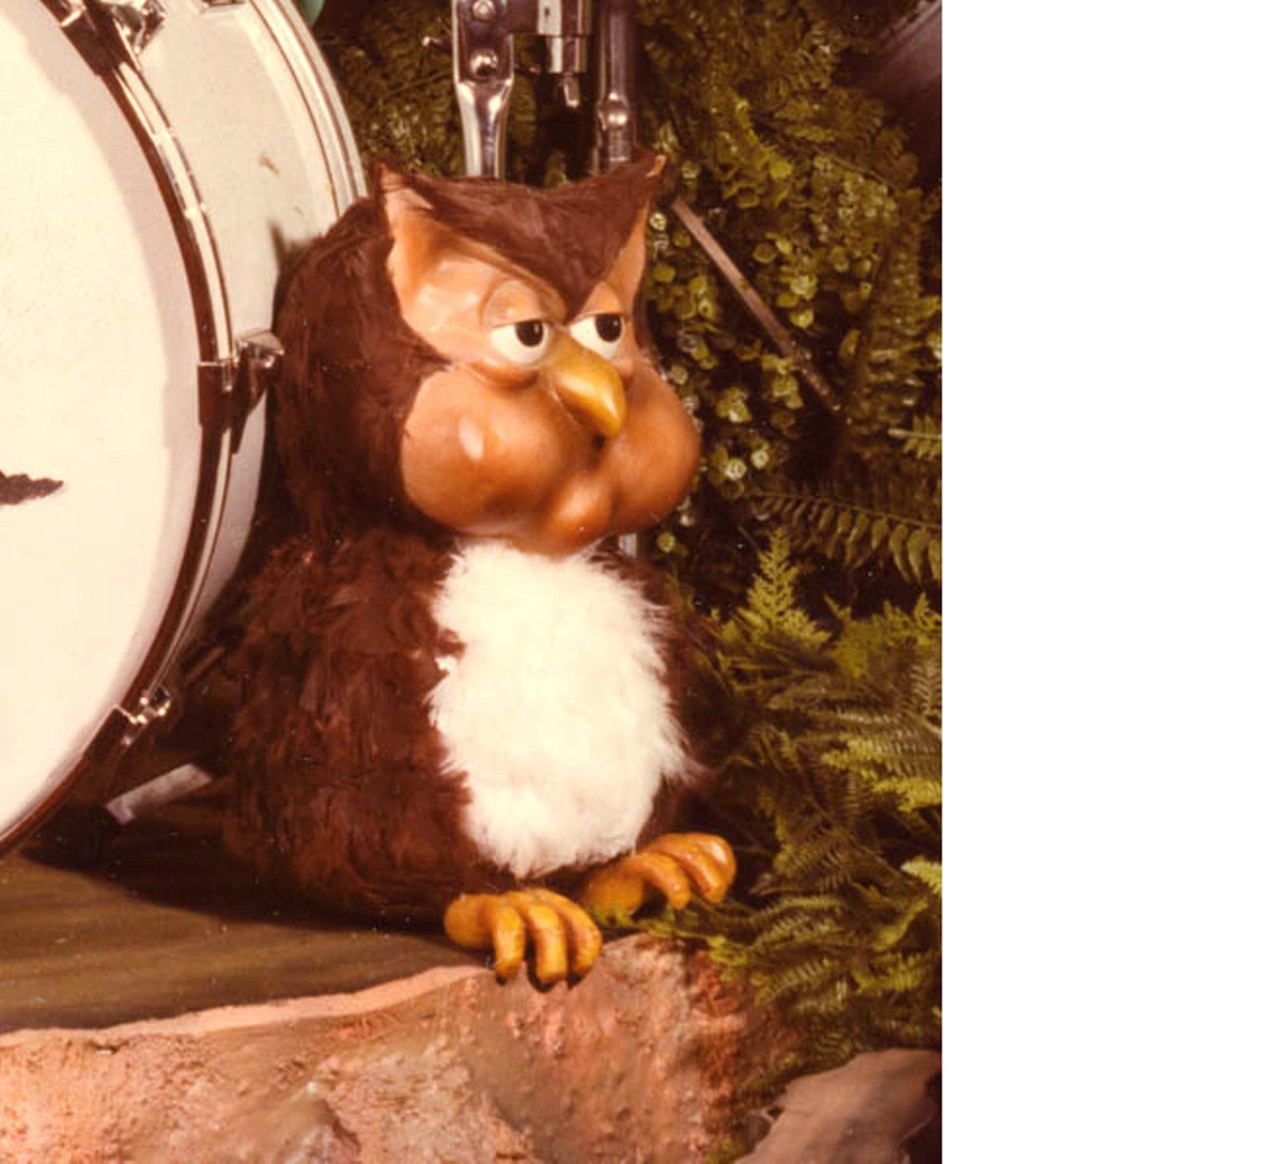 Owl was more of a prop than a character, and he sat onstage next to Dook LaRue's drum set. Photo via Showbizpizza.com